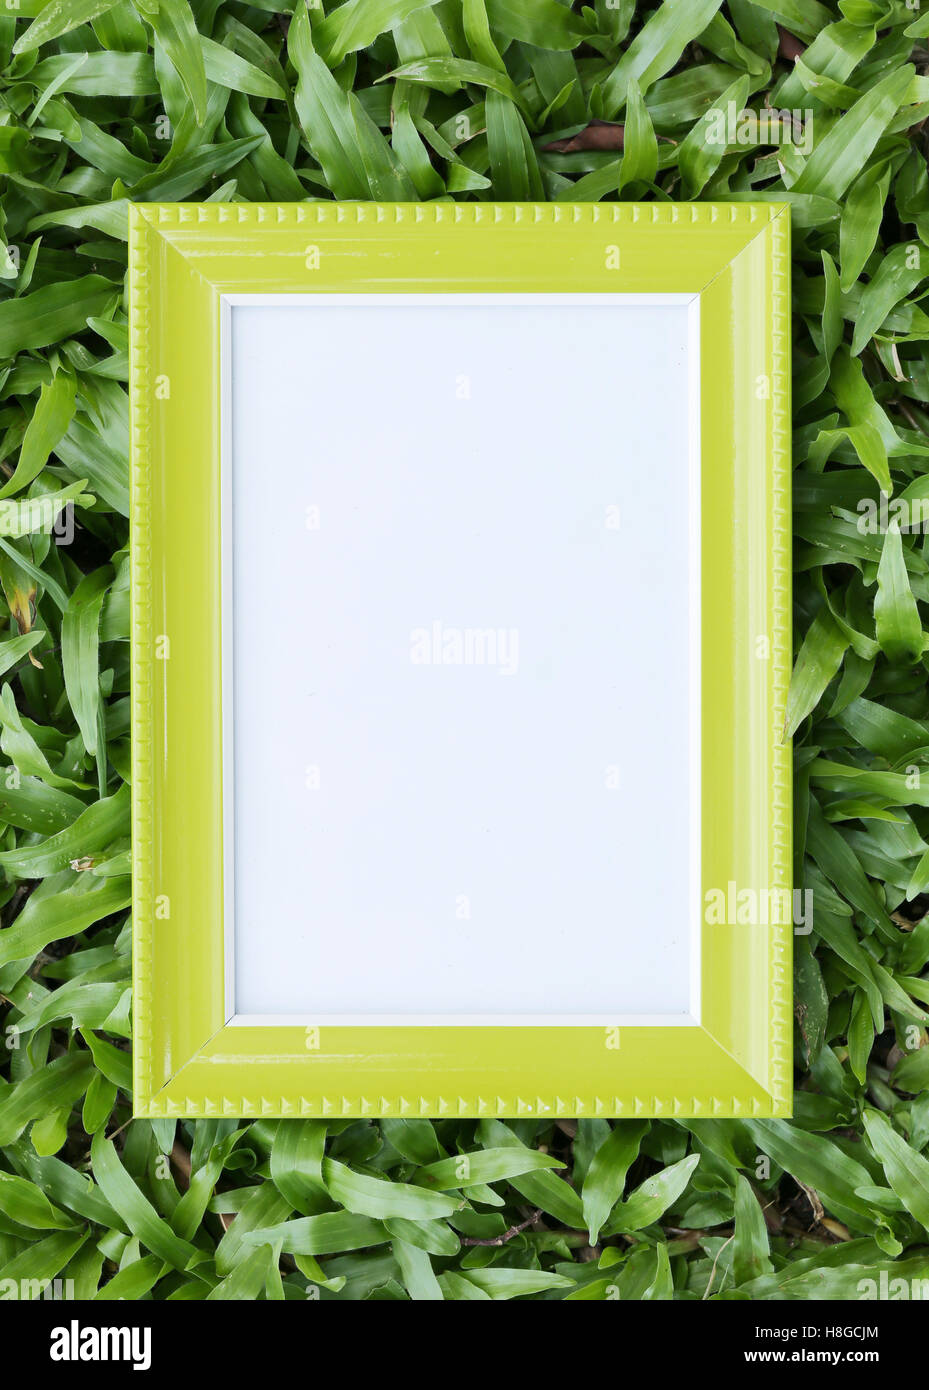 Yellow picture frame on green lawn in top view for the design nature background. Stock Photo